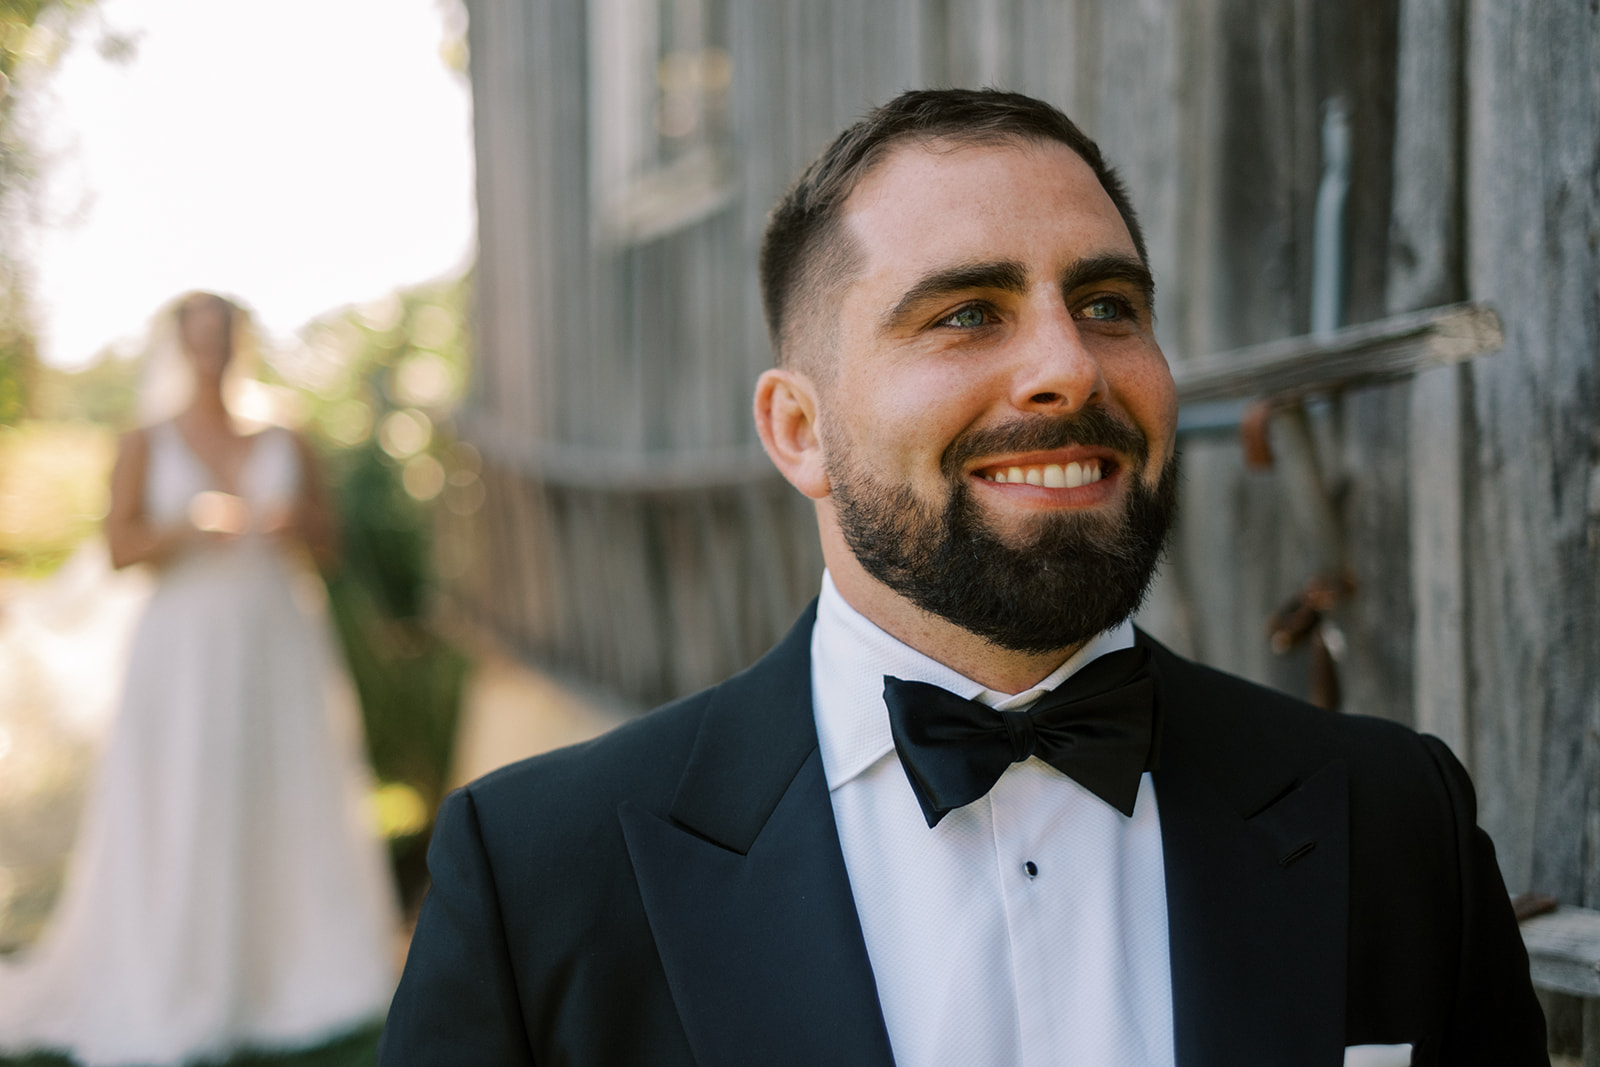 Groom smiles as he hears his bride walk up before the First Look